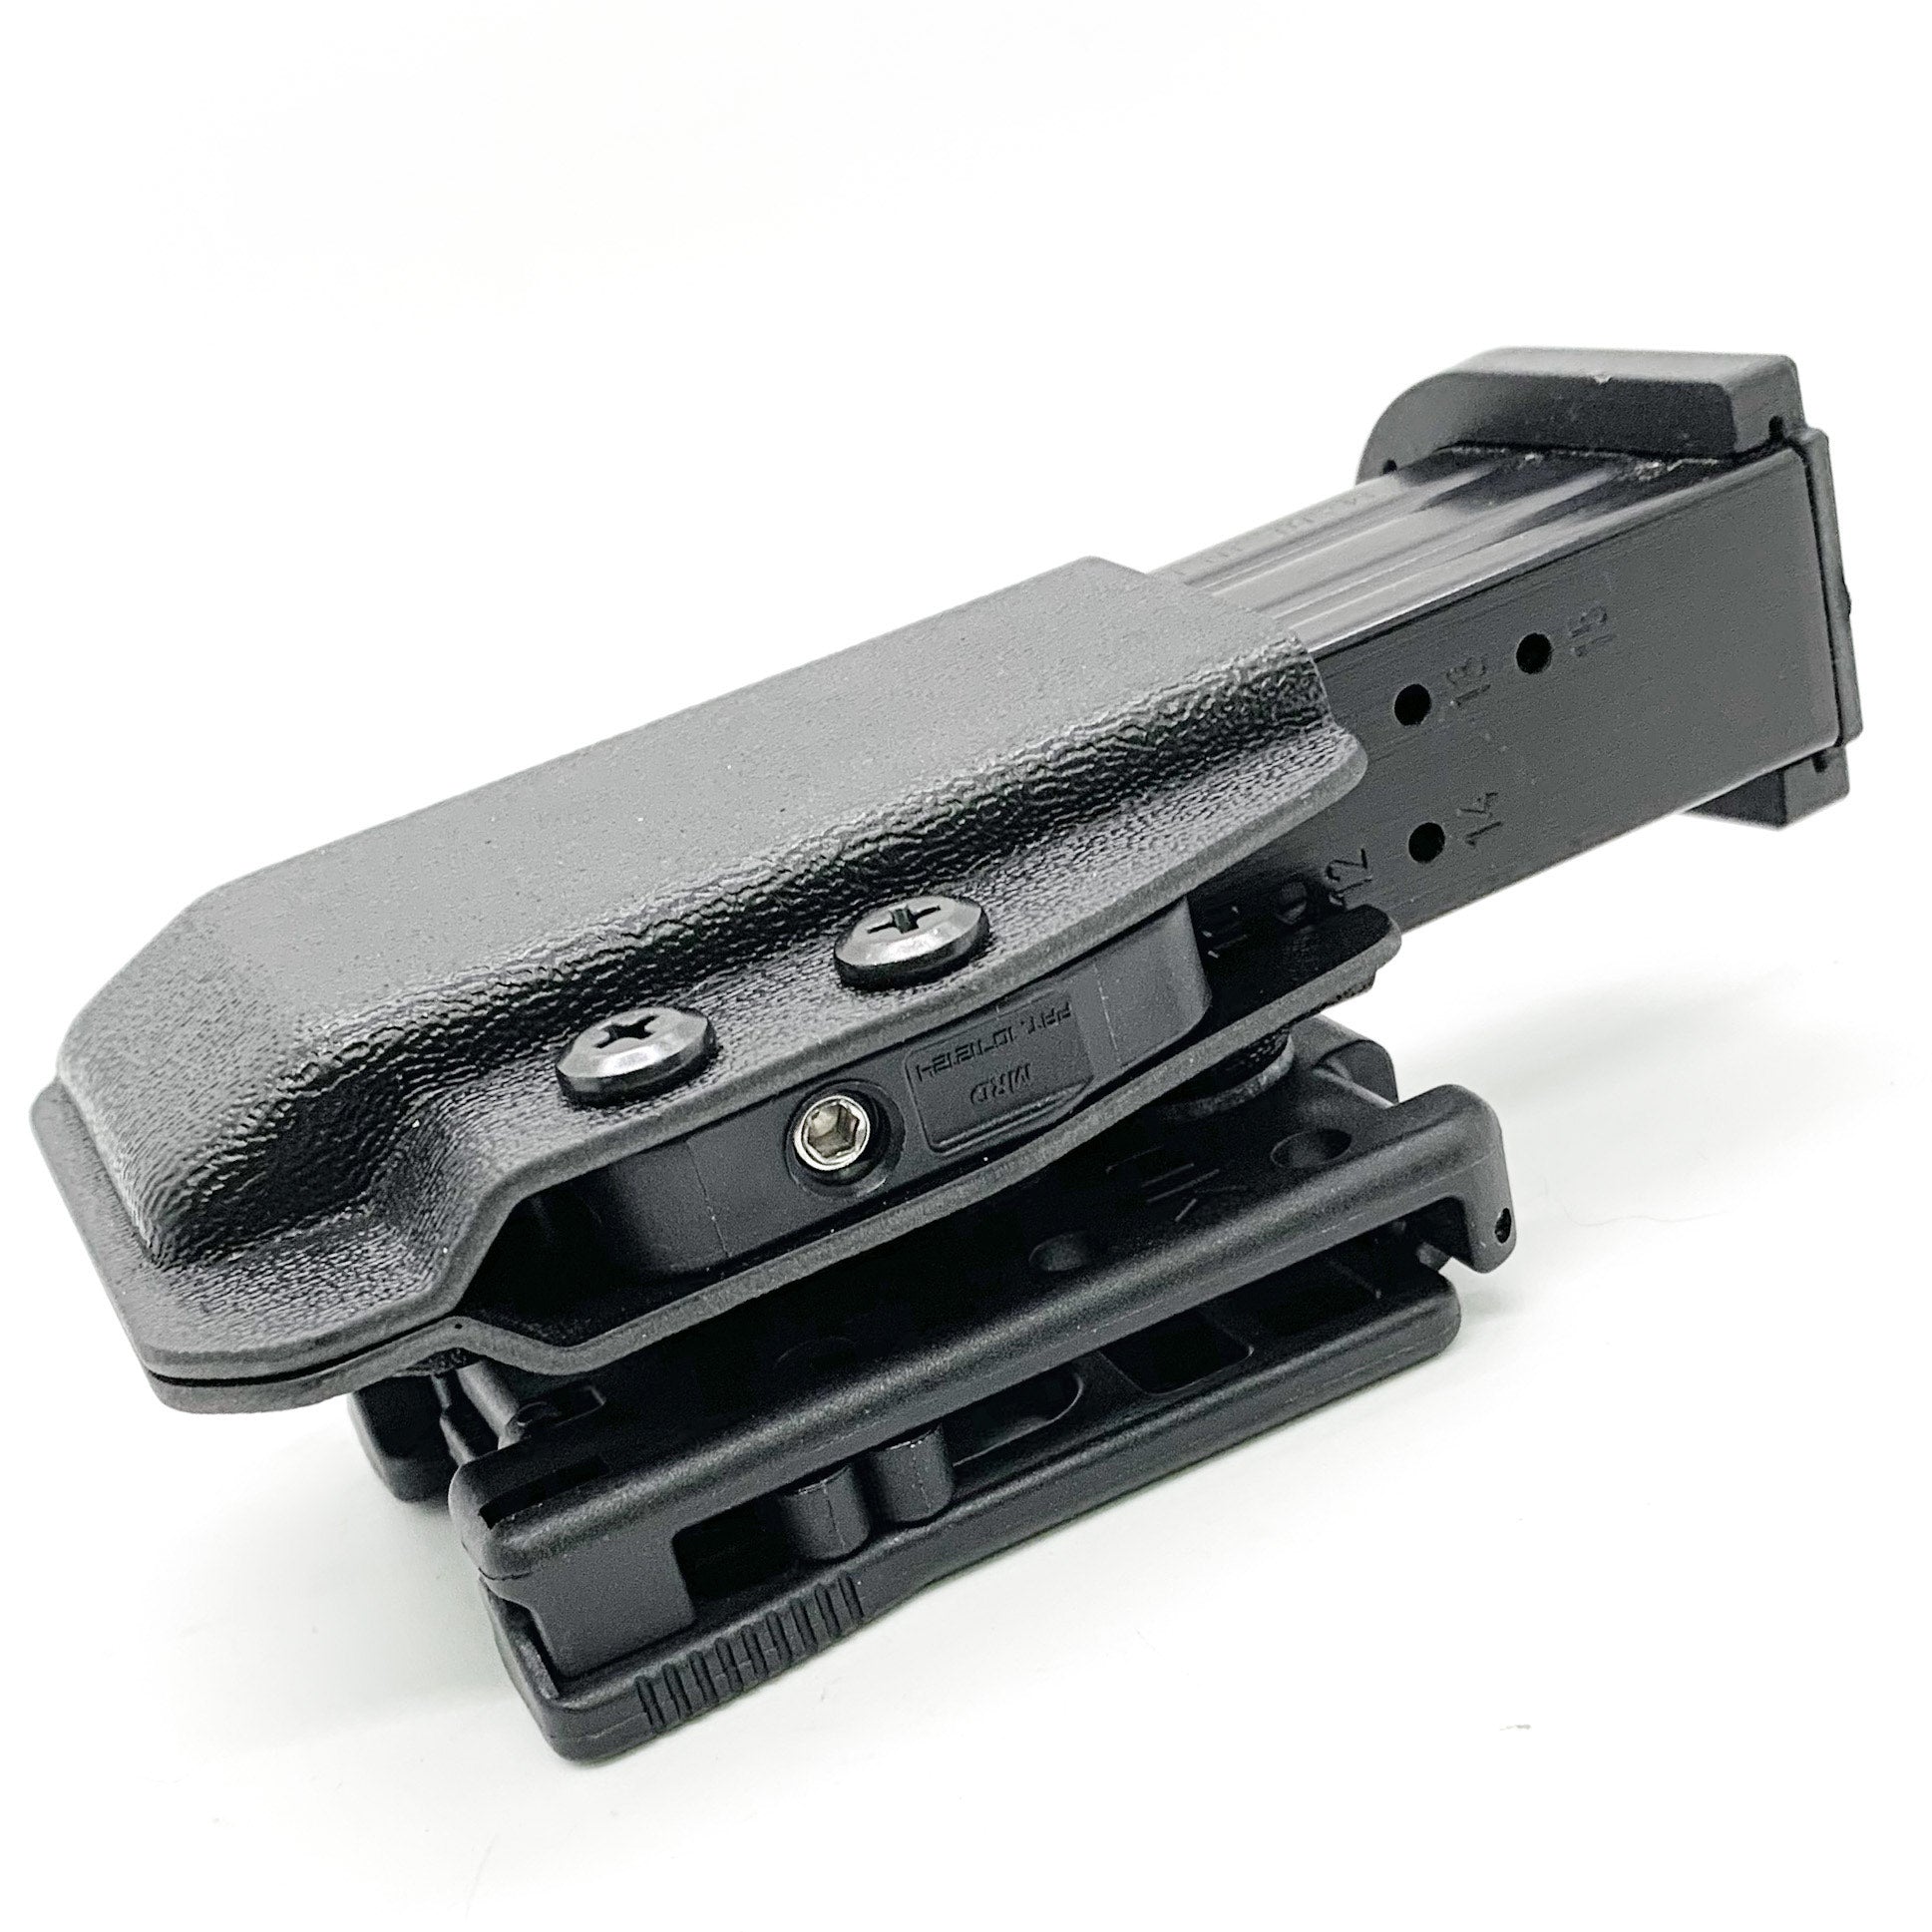 For the Best OWB Outside Waistband Kydex Magazine Pouch designed to fit the Sig Sauer P320-XTEN 10mm Magazine, shop Four Brothers Holsters. Suitable for belt widths of 1 1/2", 1 3/4". 2" & 2 1/2" Adjustable retention and cant outside waist carrier holster. Will allow bullets forward & bullets back orientation. X10 X Ten